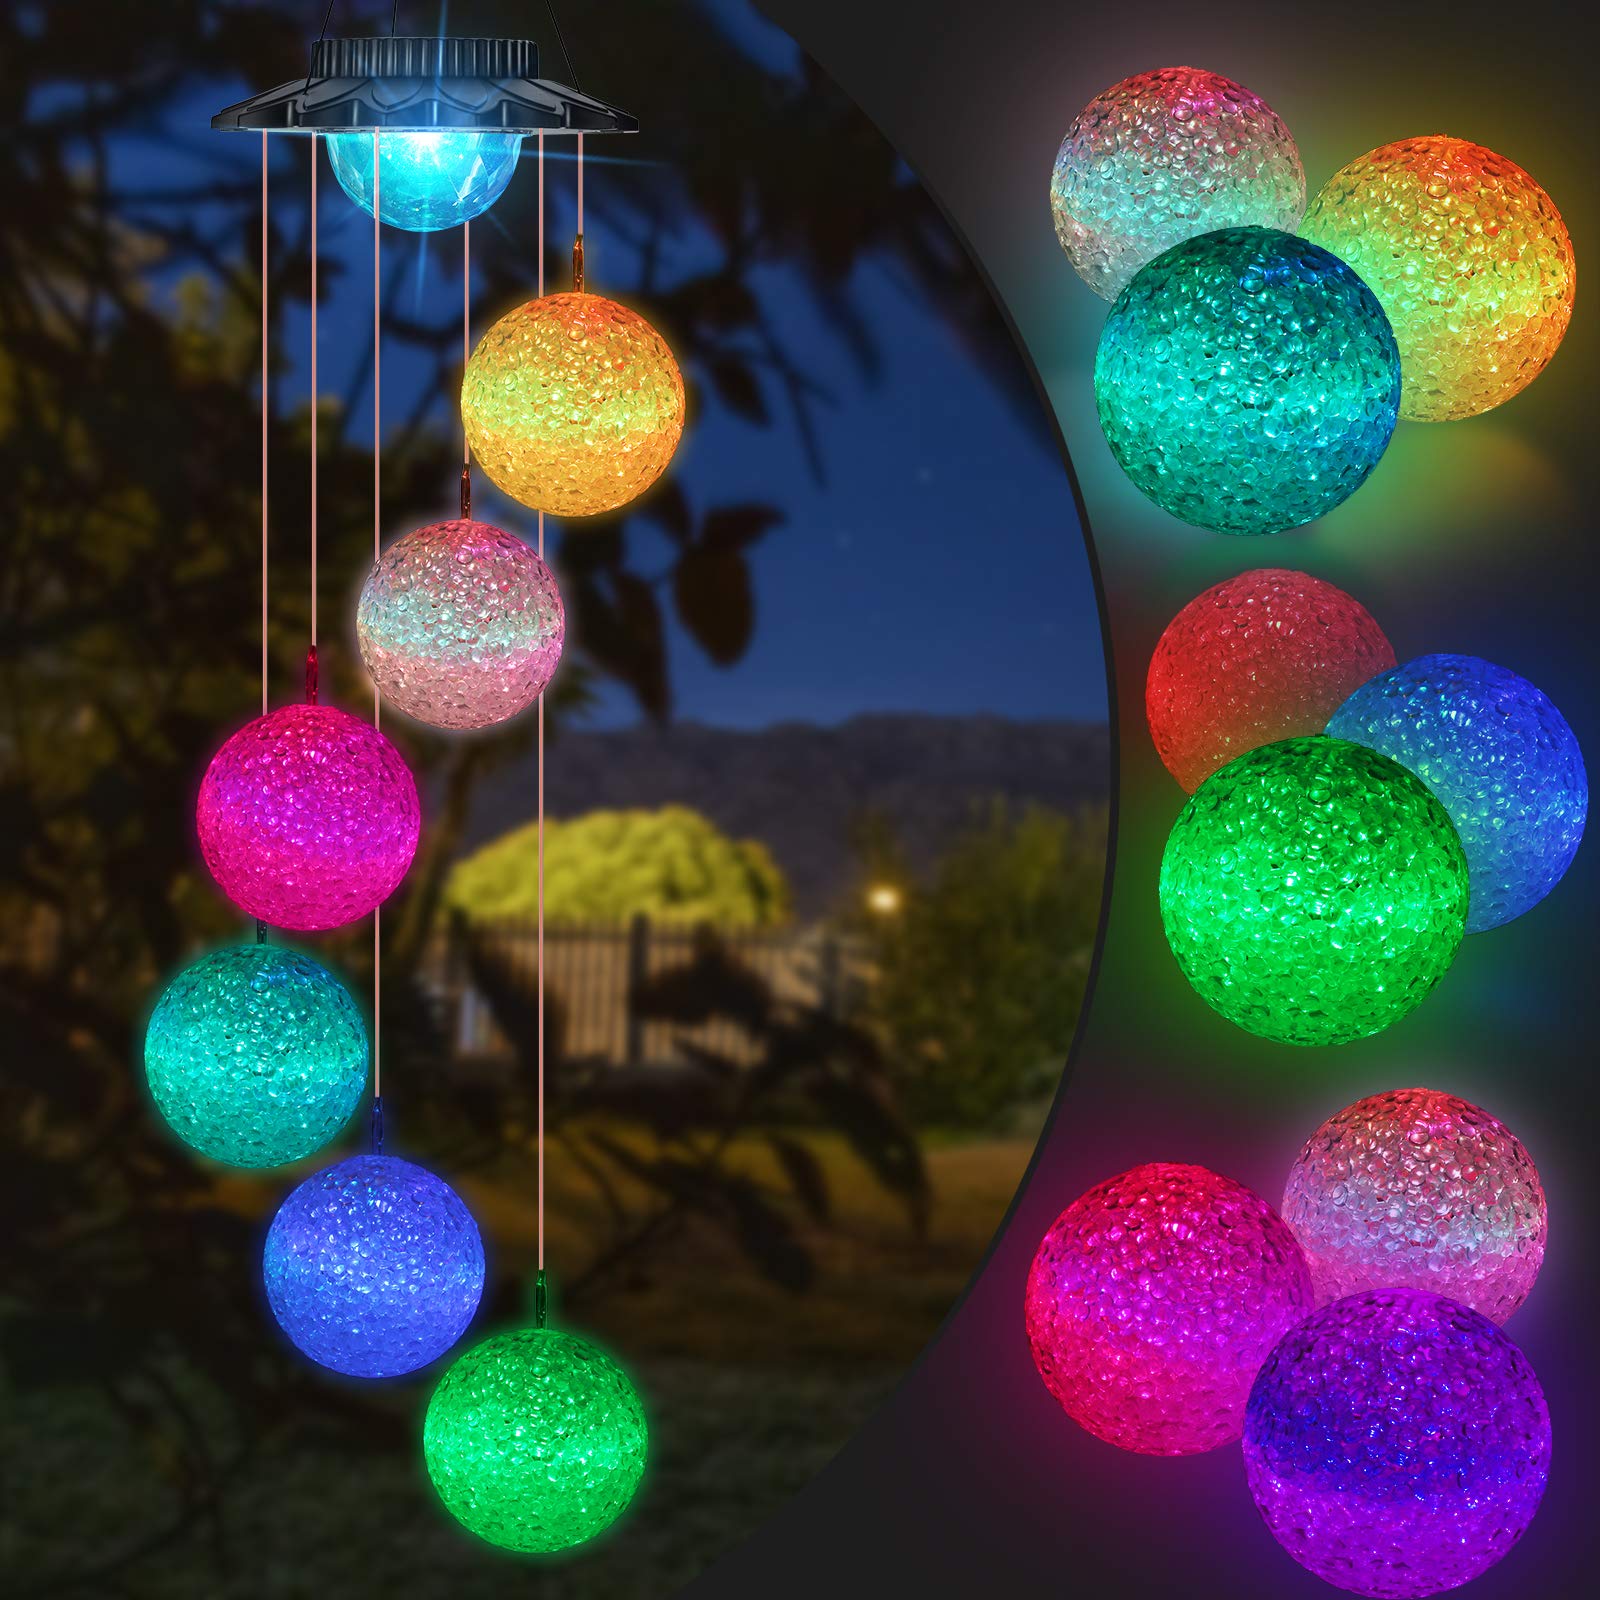 iShabao Solar Wind Chimes, Led Ball Color Changing Outdoor Indoor Waterproof Mobile Decorative Outdoor Hanging Solar Lights For Home Pat